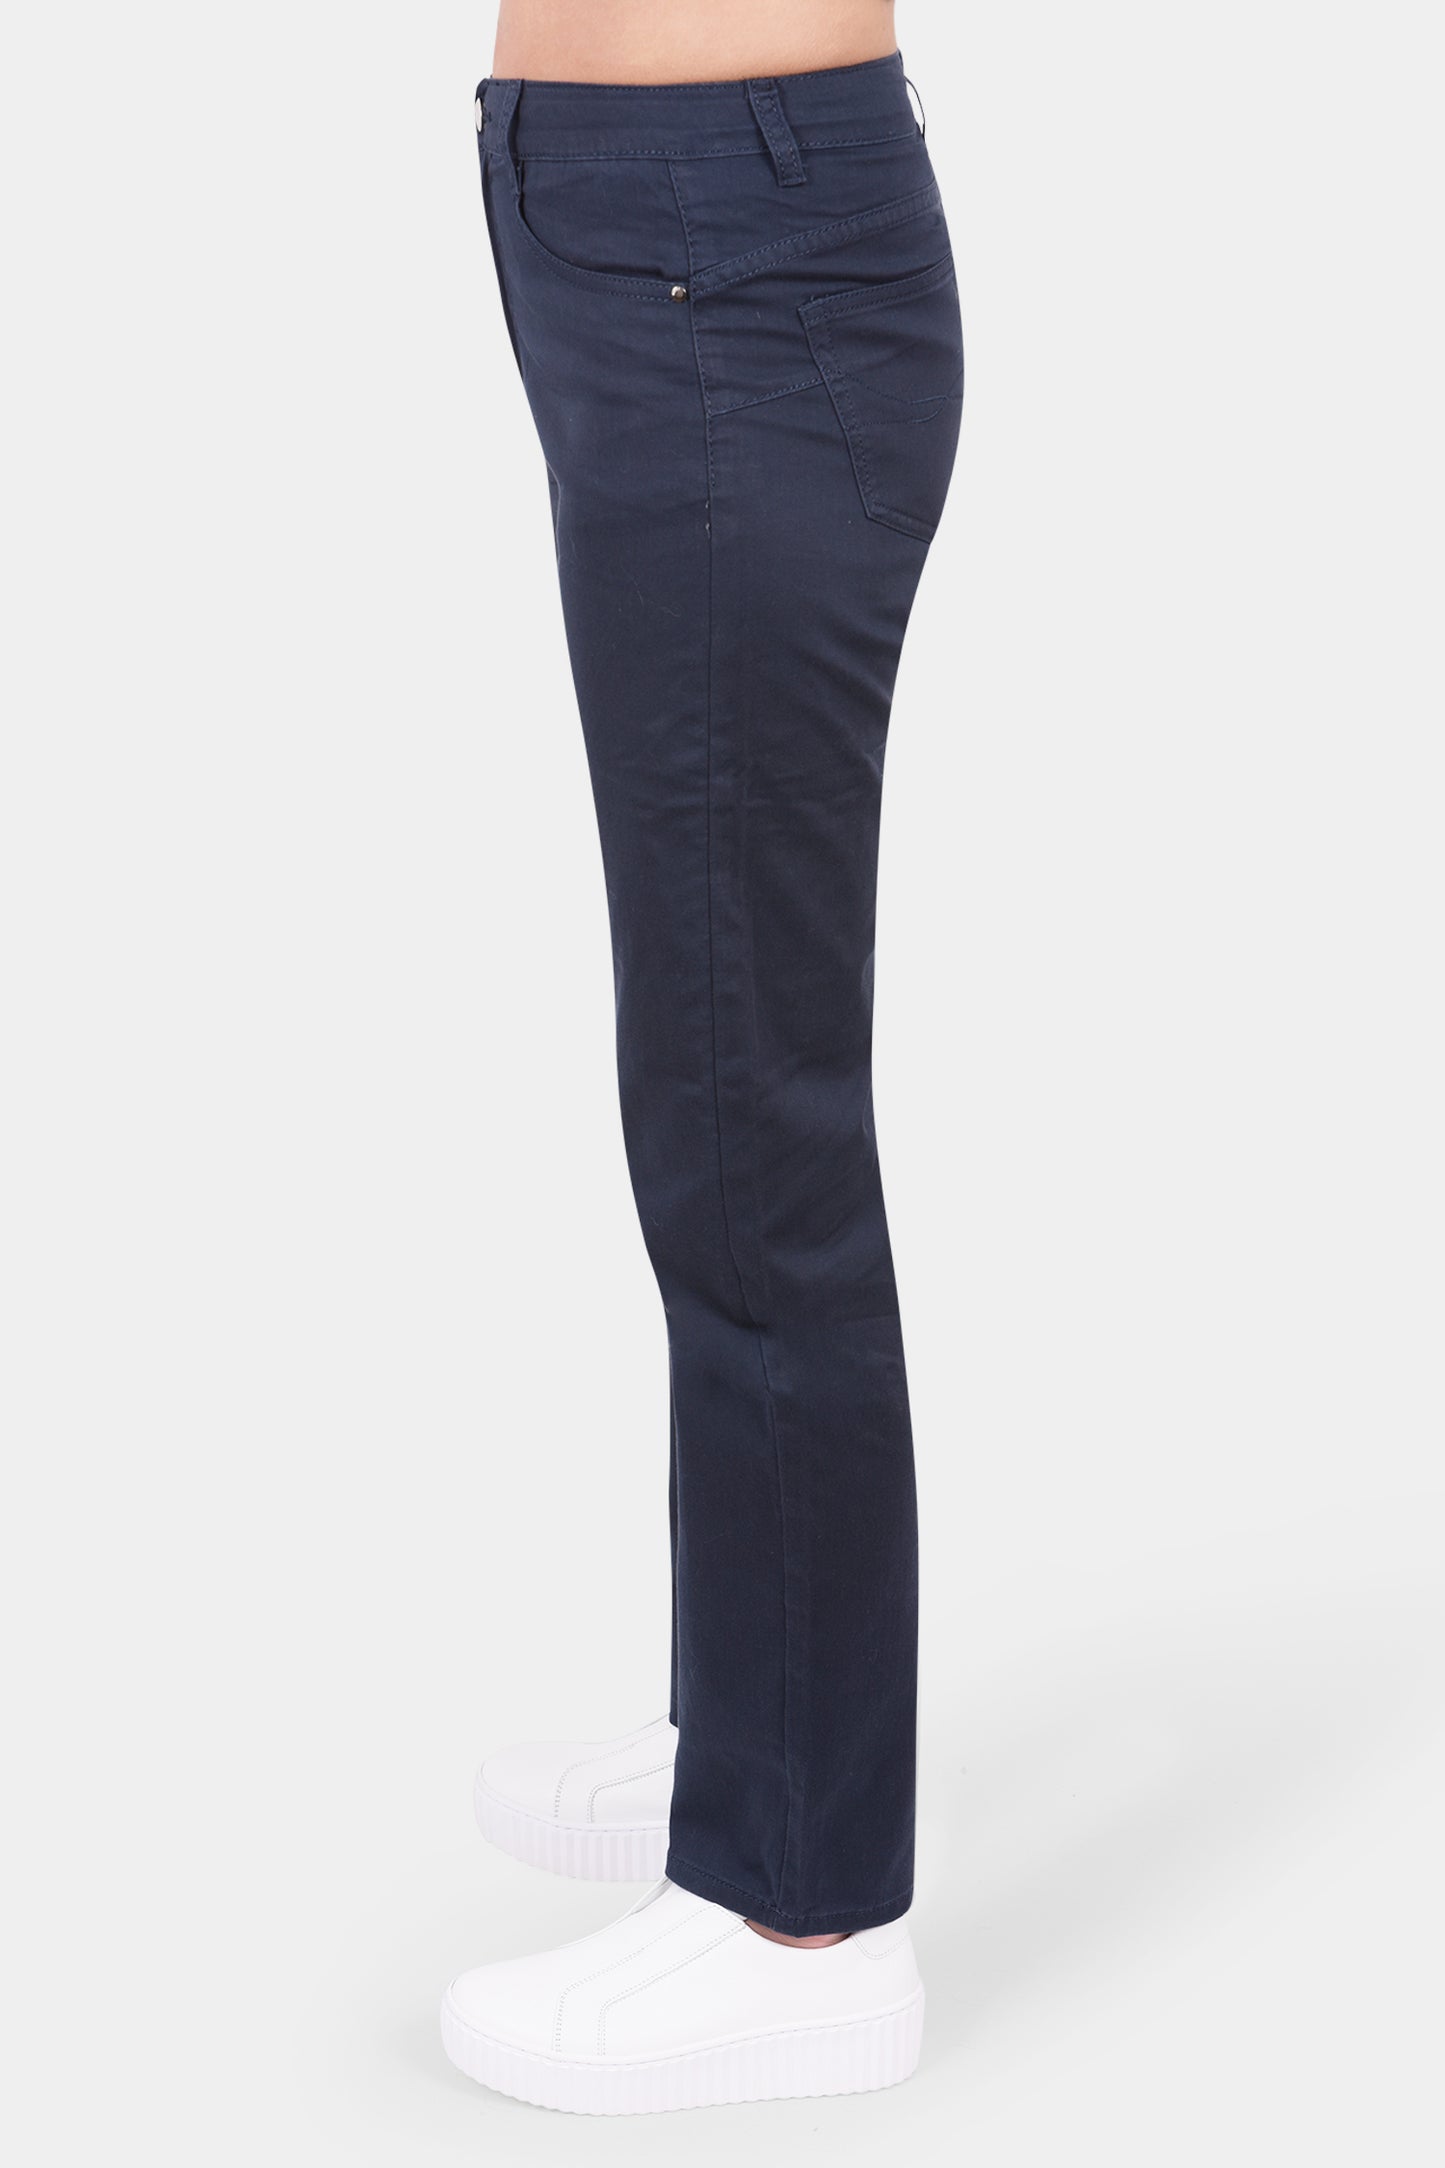 Essential Cotton Stretchy Jeans Navy